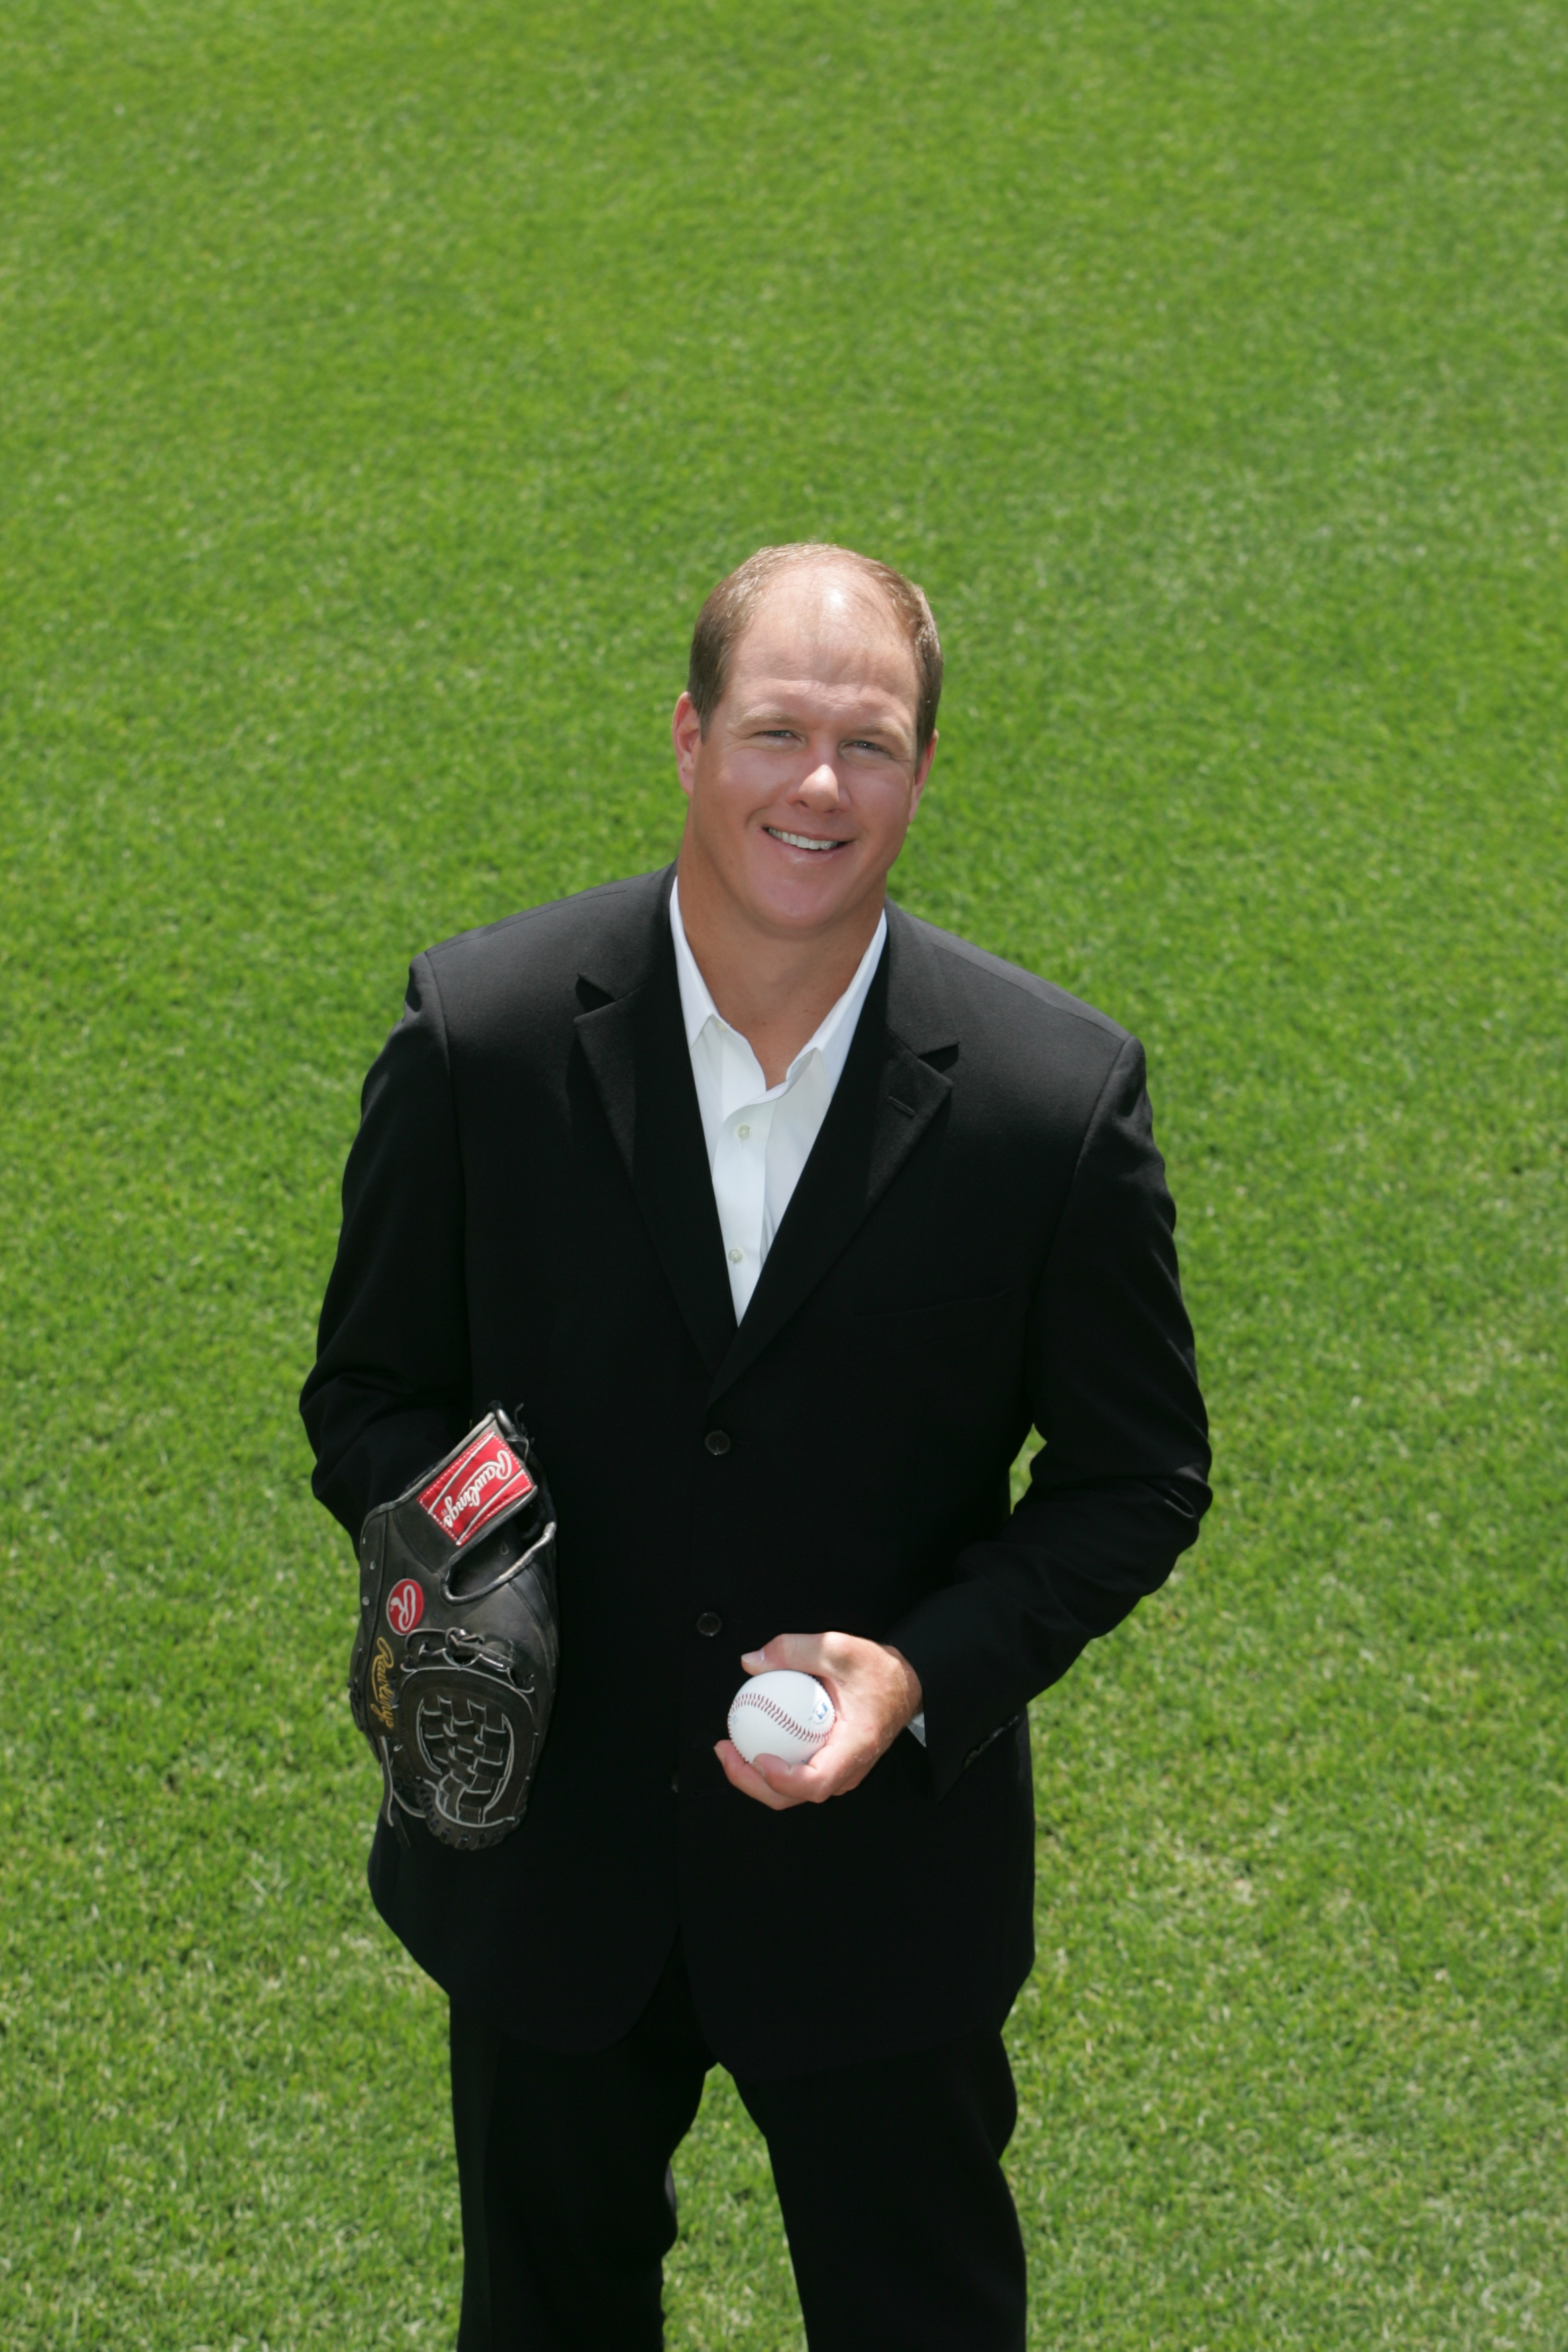 Retired MLB Pitcher and Olympic Gold Medalist Jim Abbott to